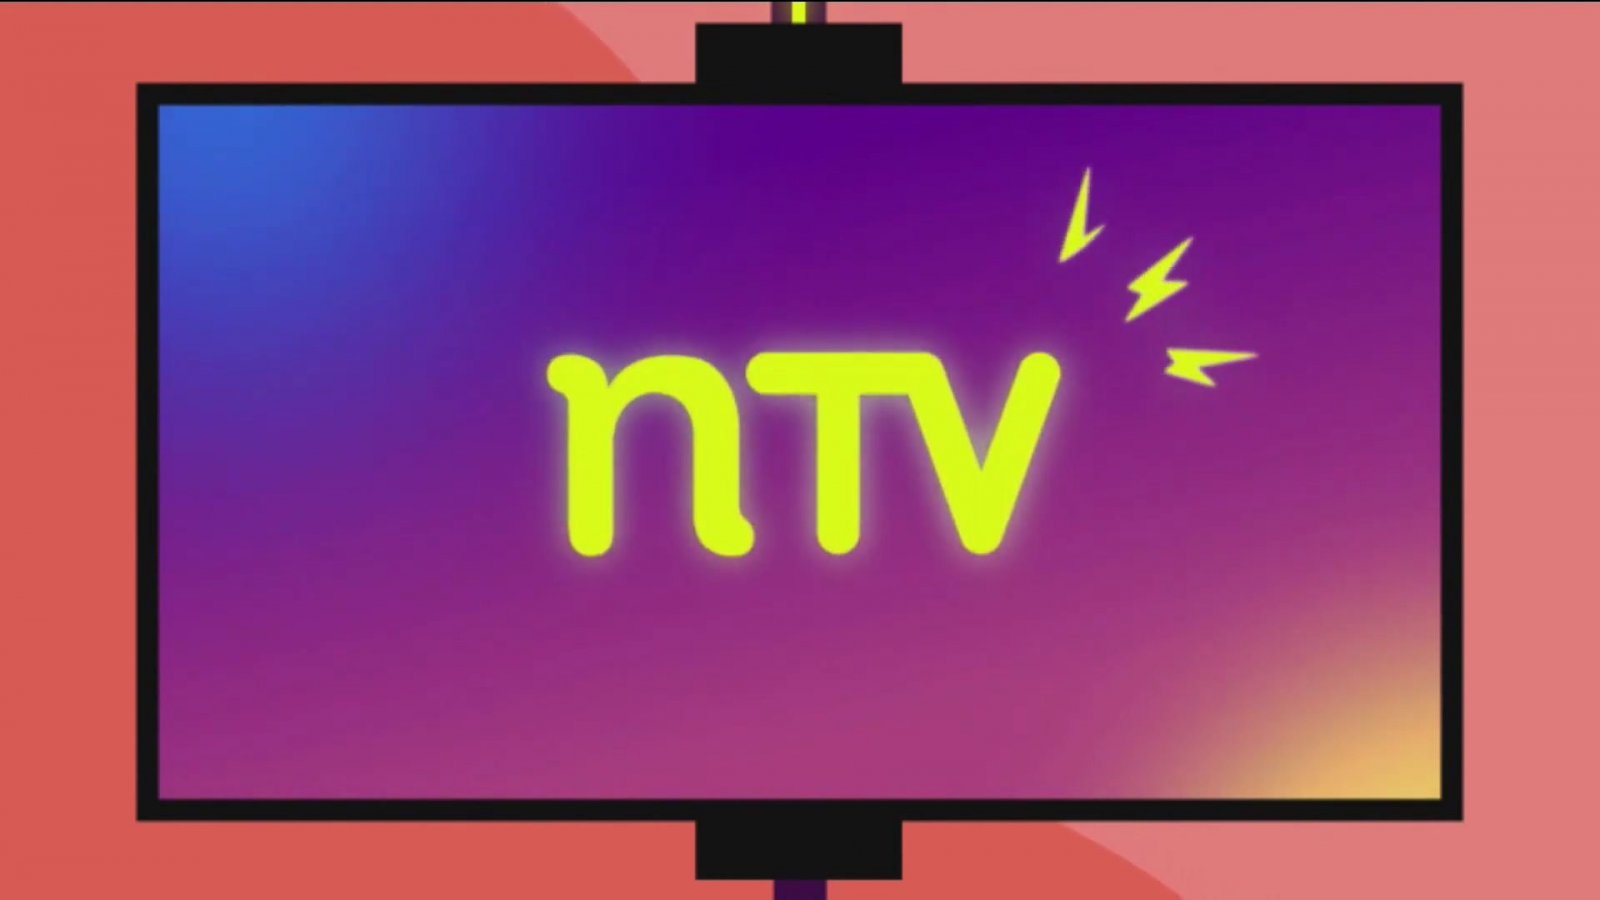 NTV: A Trusted Source of News and Entertainment